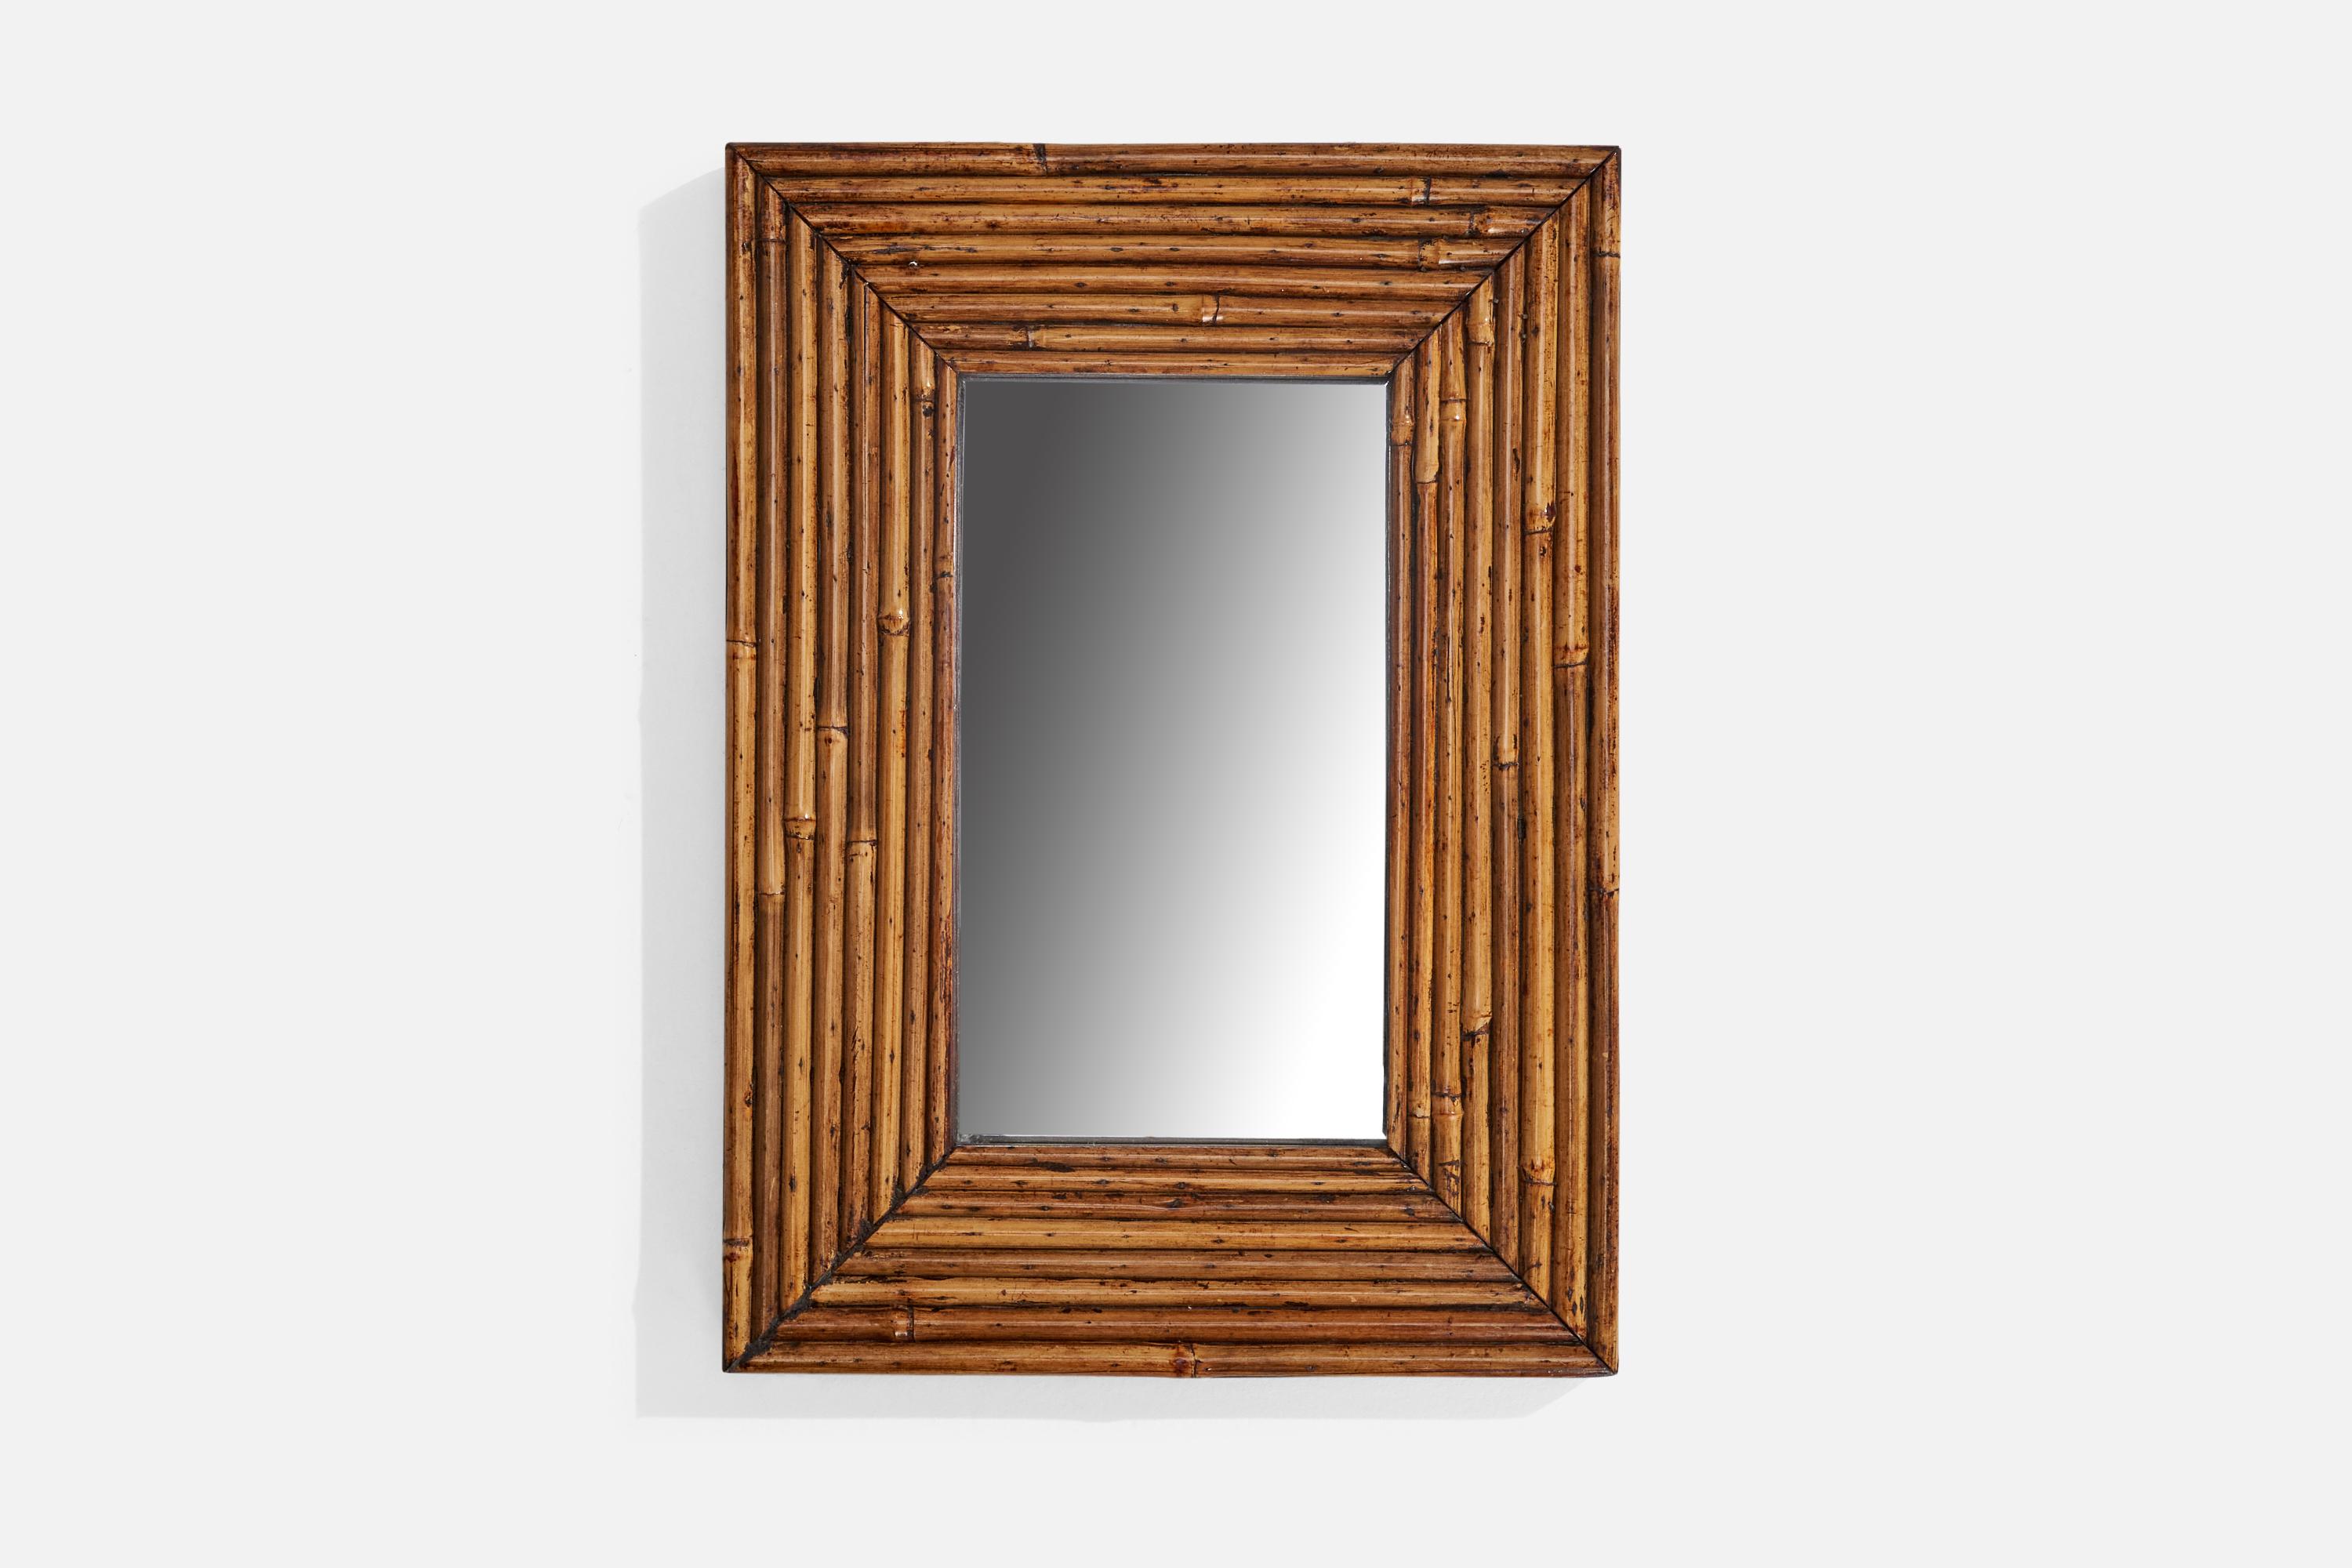 A bamboo and dark-stained wood mirror designed and produced in Italy, c. 1950s.